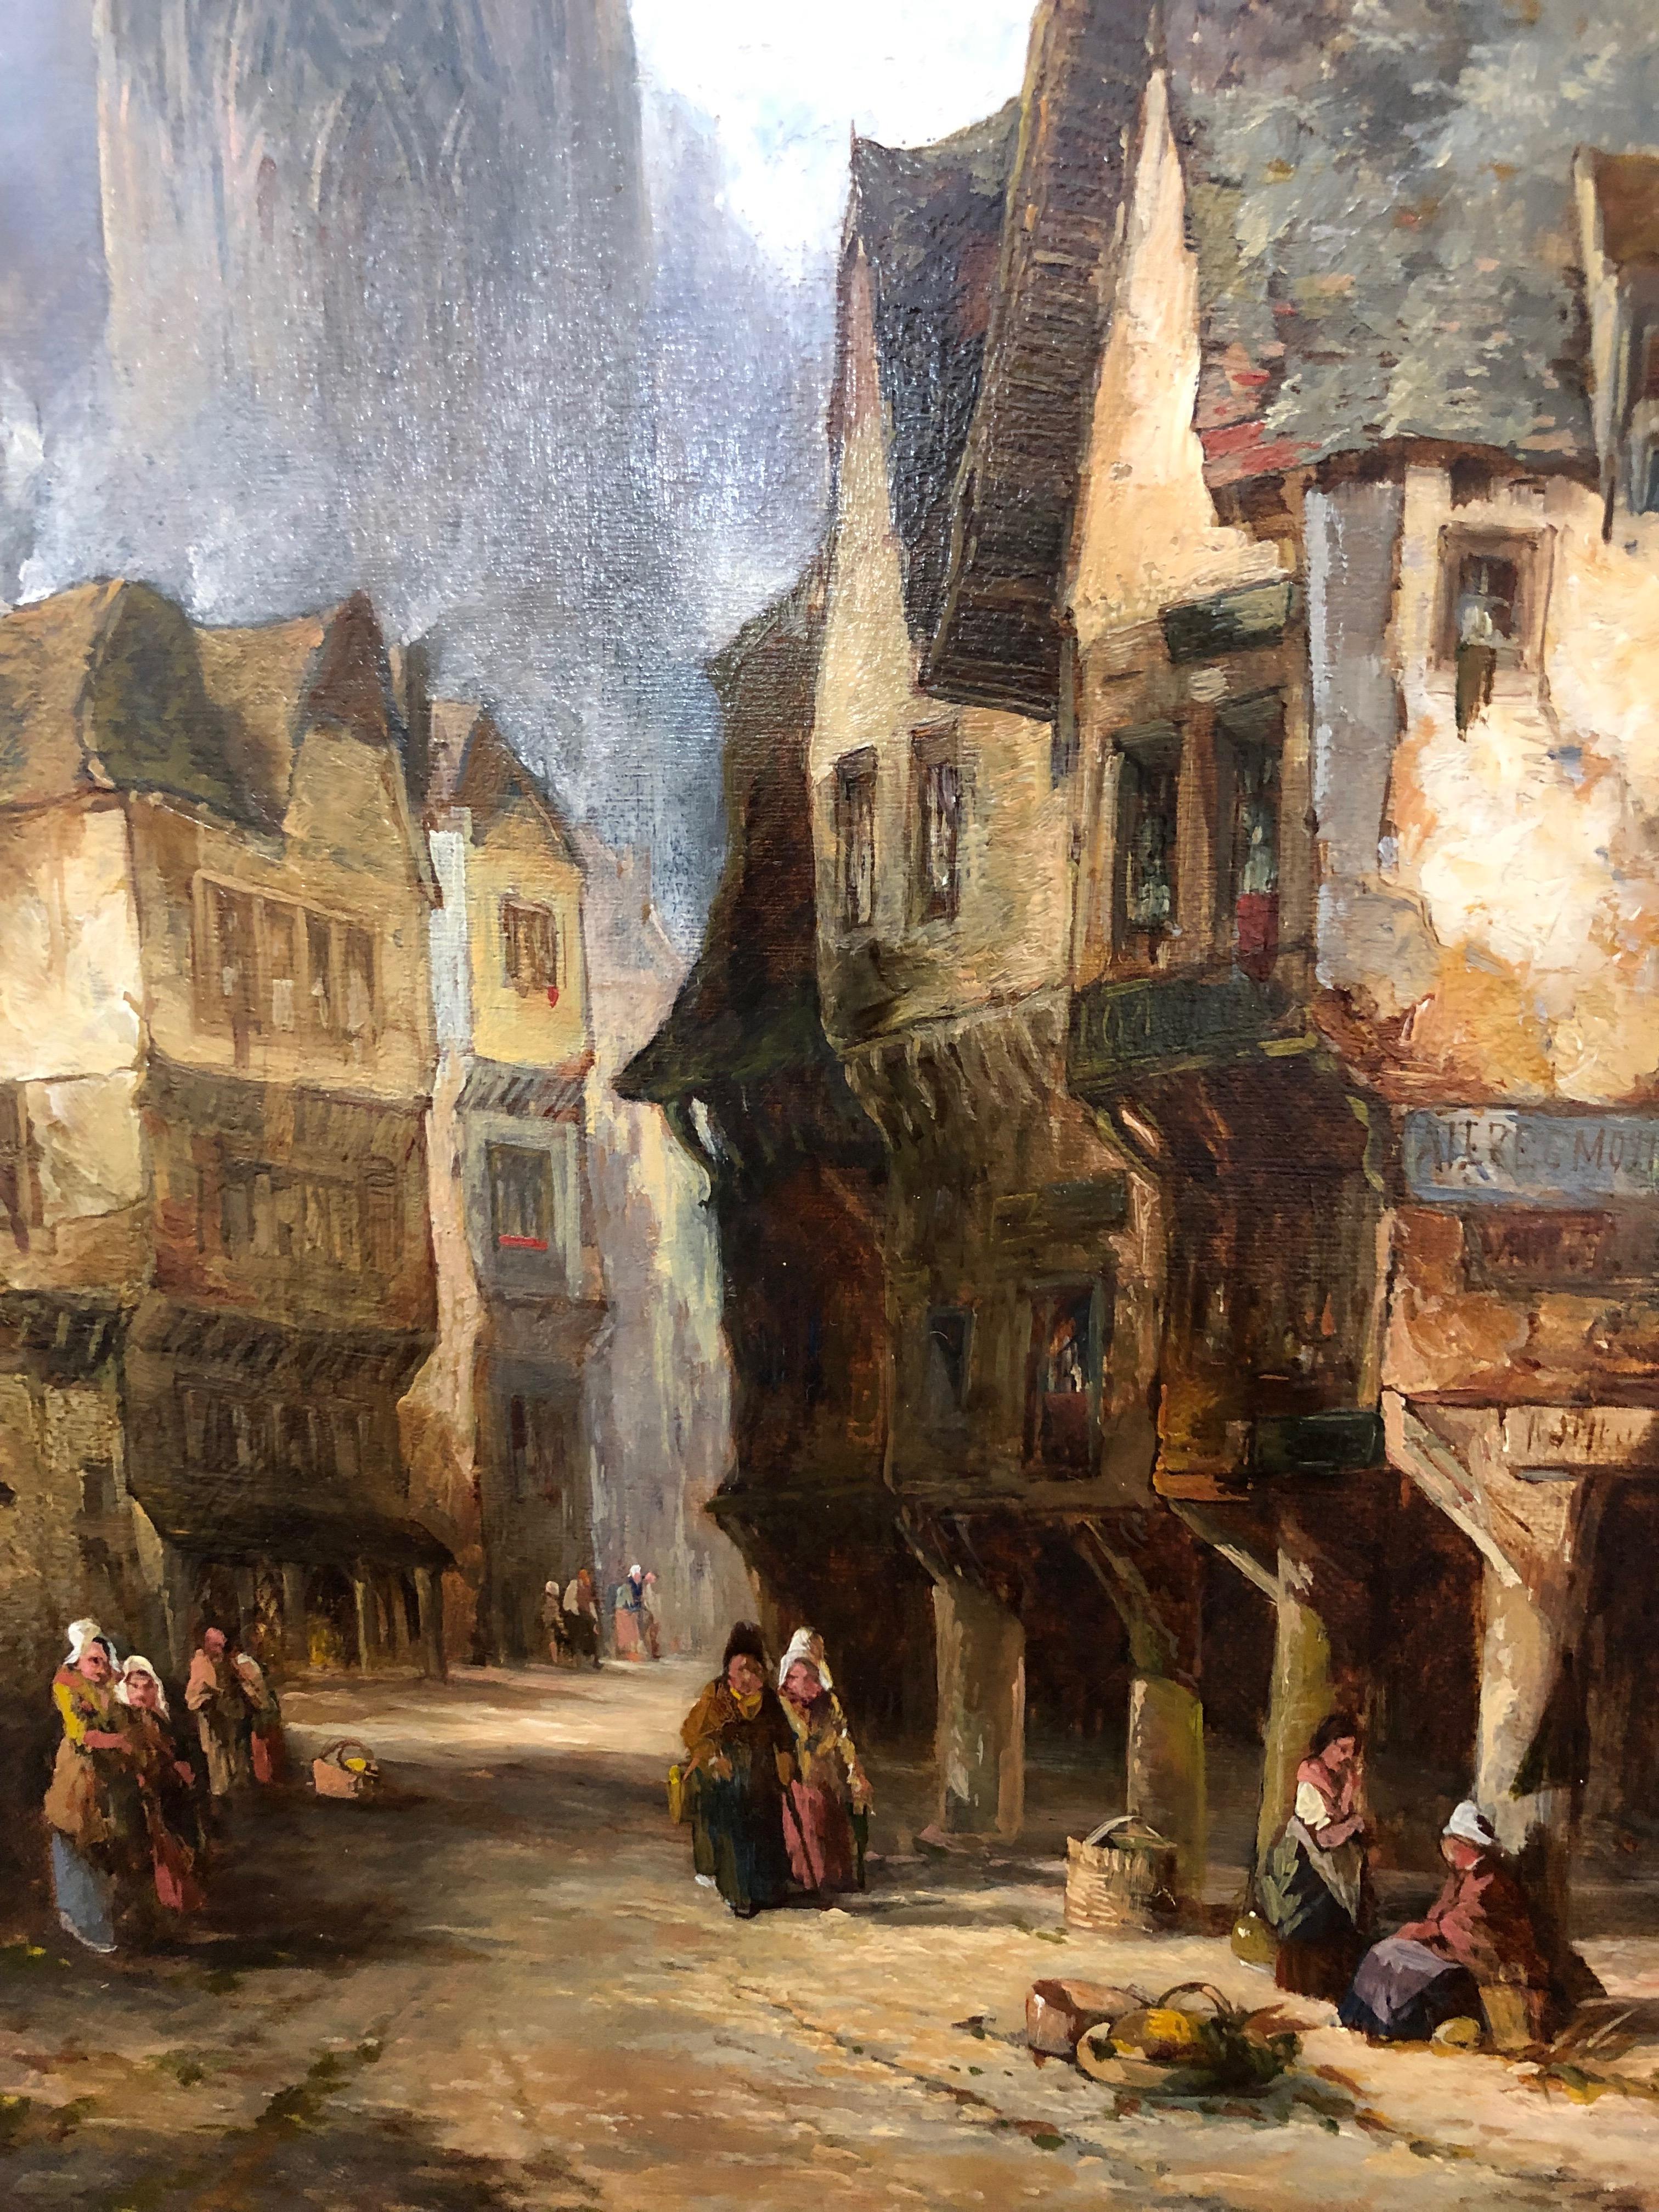 A Townscape painting of the medieval town of Dinan in Brittany, Northern France.

The artist, Alfred Montague R.B.A. who flourished 1832 - 1883 was a successful painter of landscapes, townscapes and coastal marines. He was a prolific exhibitor, with